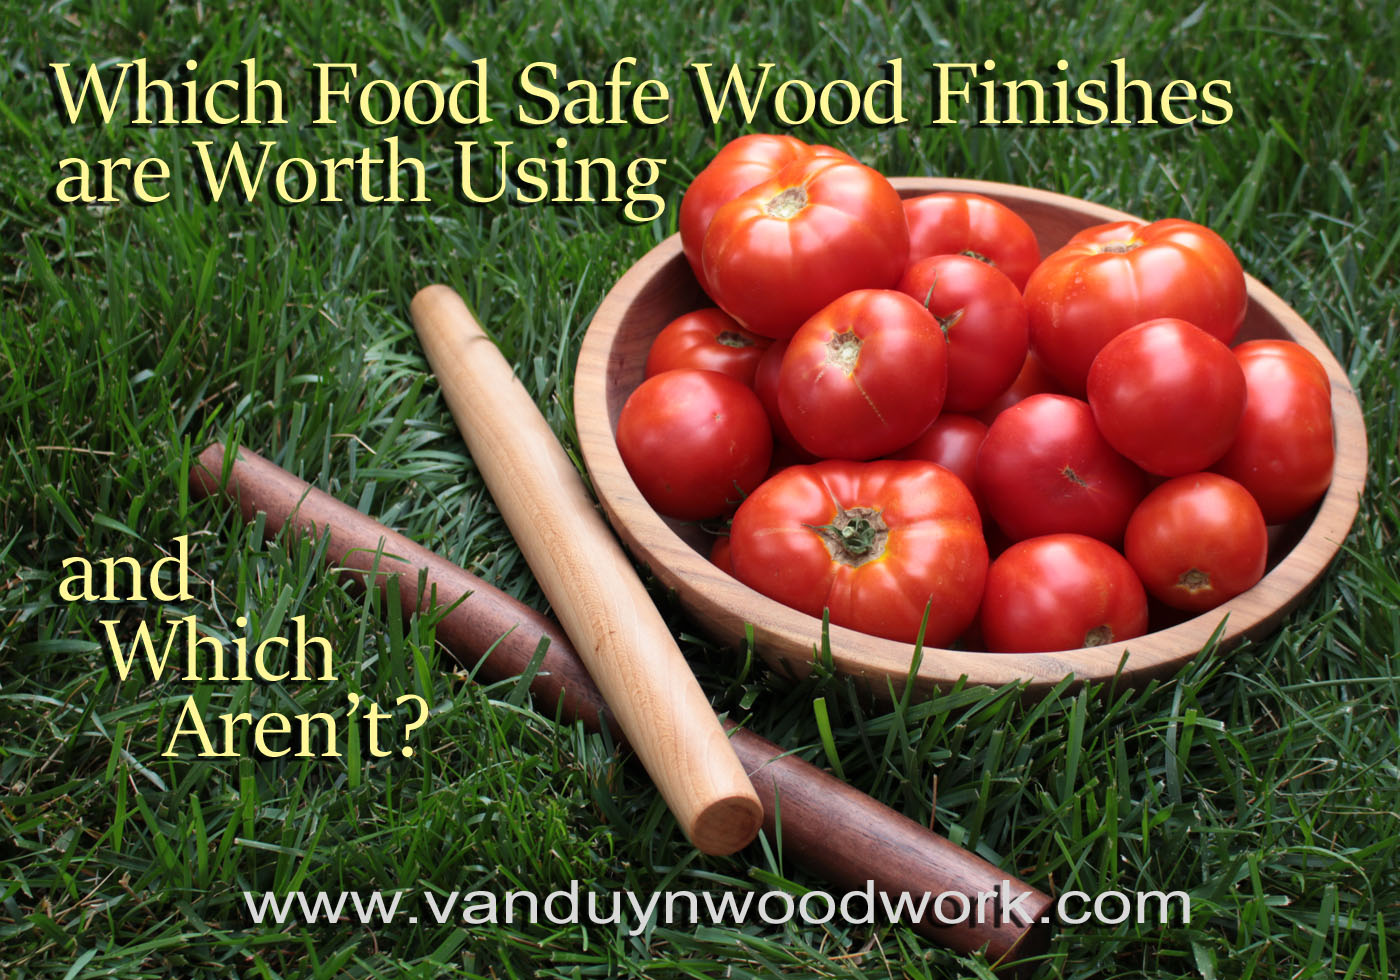 My Favorite Food Safe Wood Finish - Waterproof Almost - Wooden Bowl